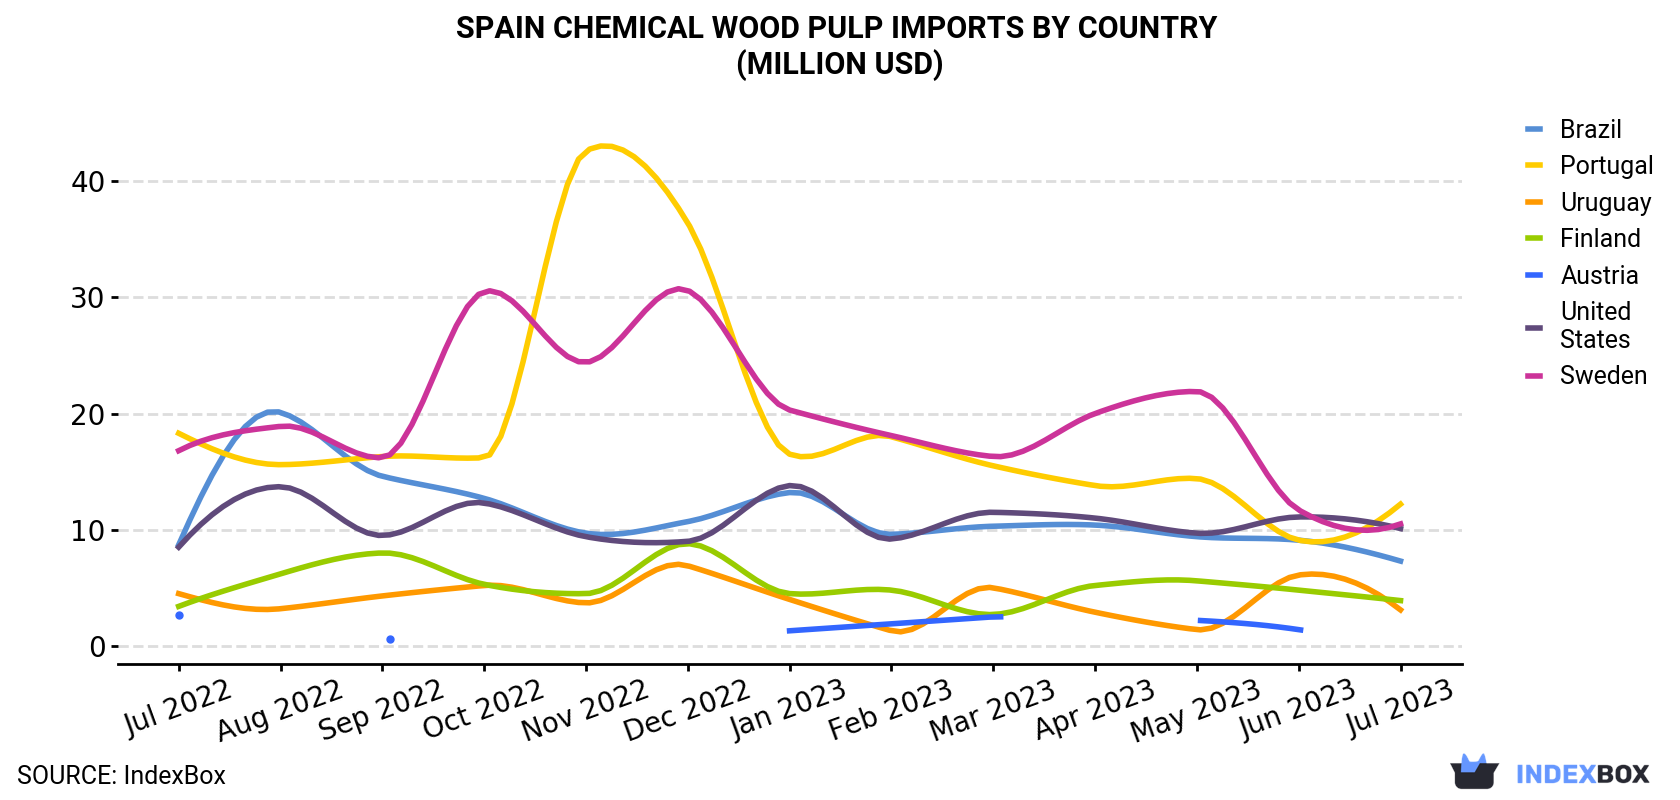 Spain Chemical Wood Pulp Imports By Country (Million USD)